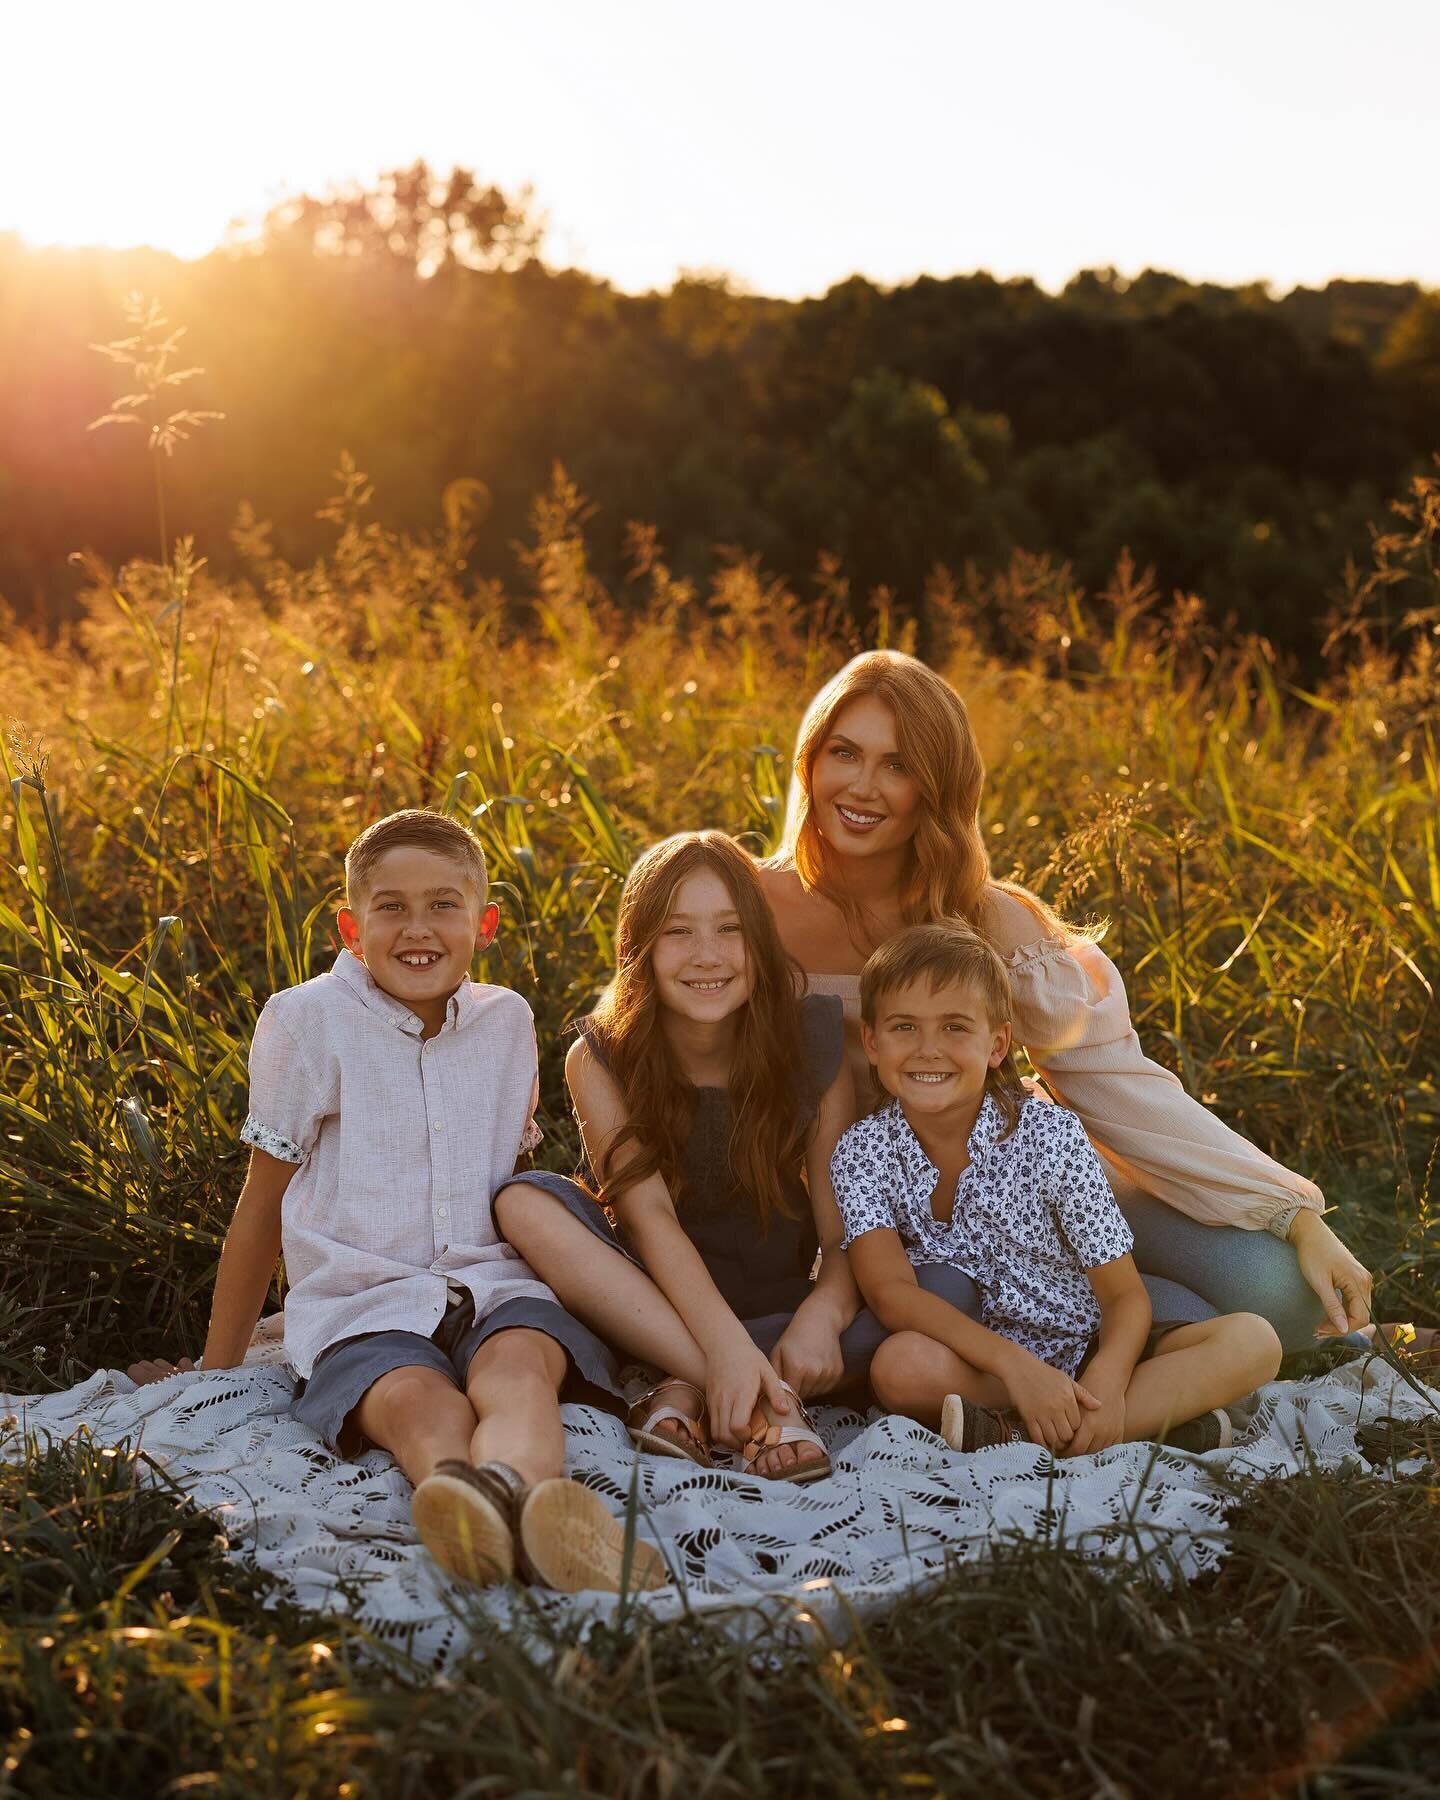 Ready for the summer golden hours 🥰❤️☀️

www.marissaharrisonphotography.com
.
.
.
#familyphotography #familyphotographer #dahlonega #dahlonegaphotographer #northgeorgia #northgeorgiaphotographer